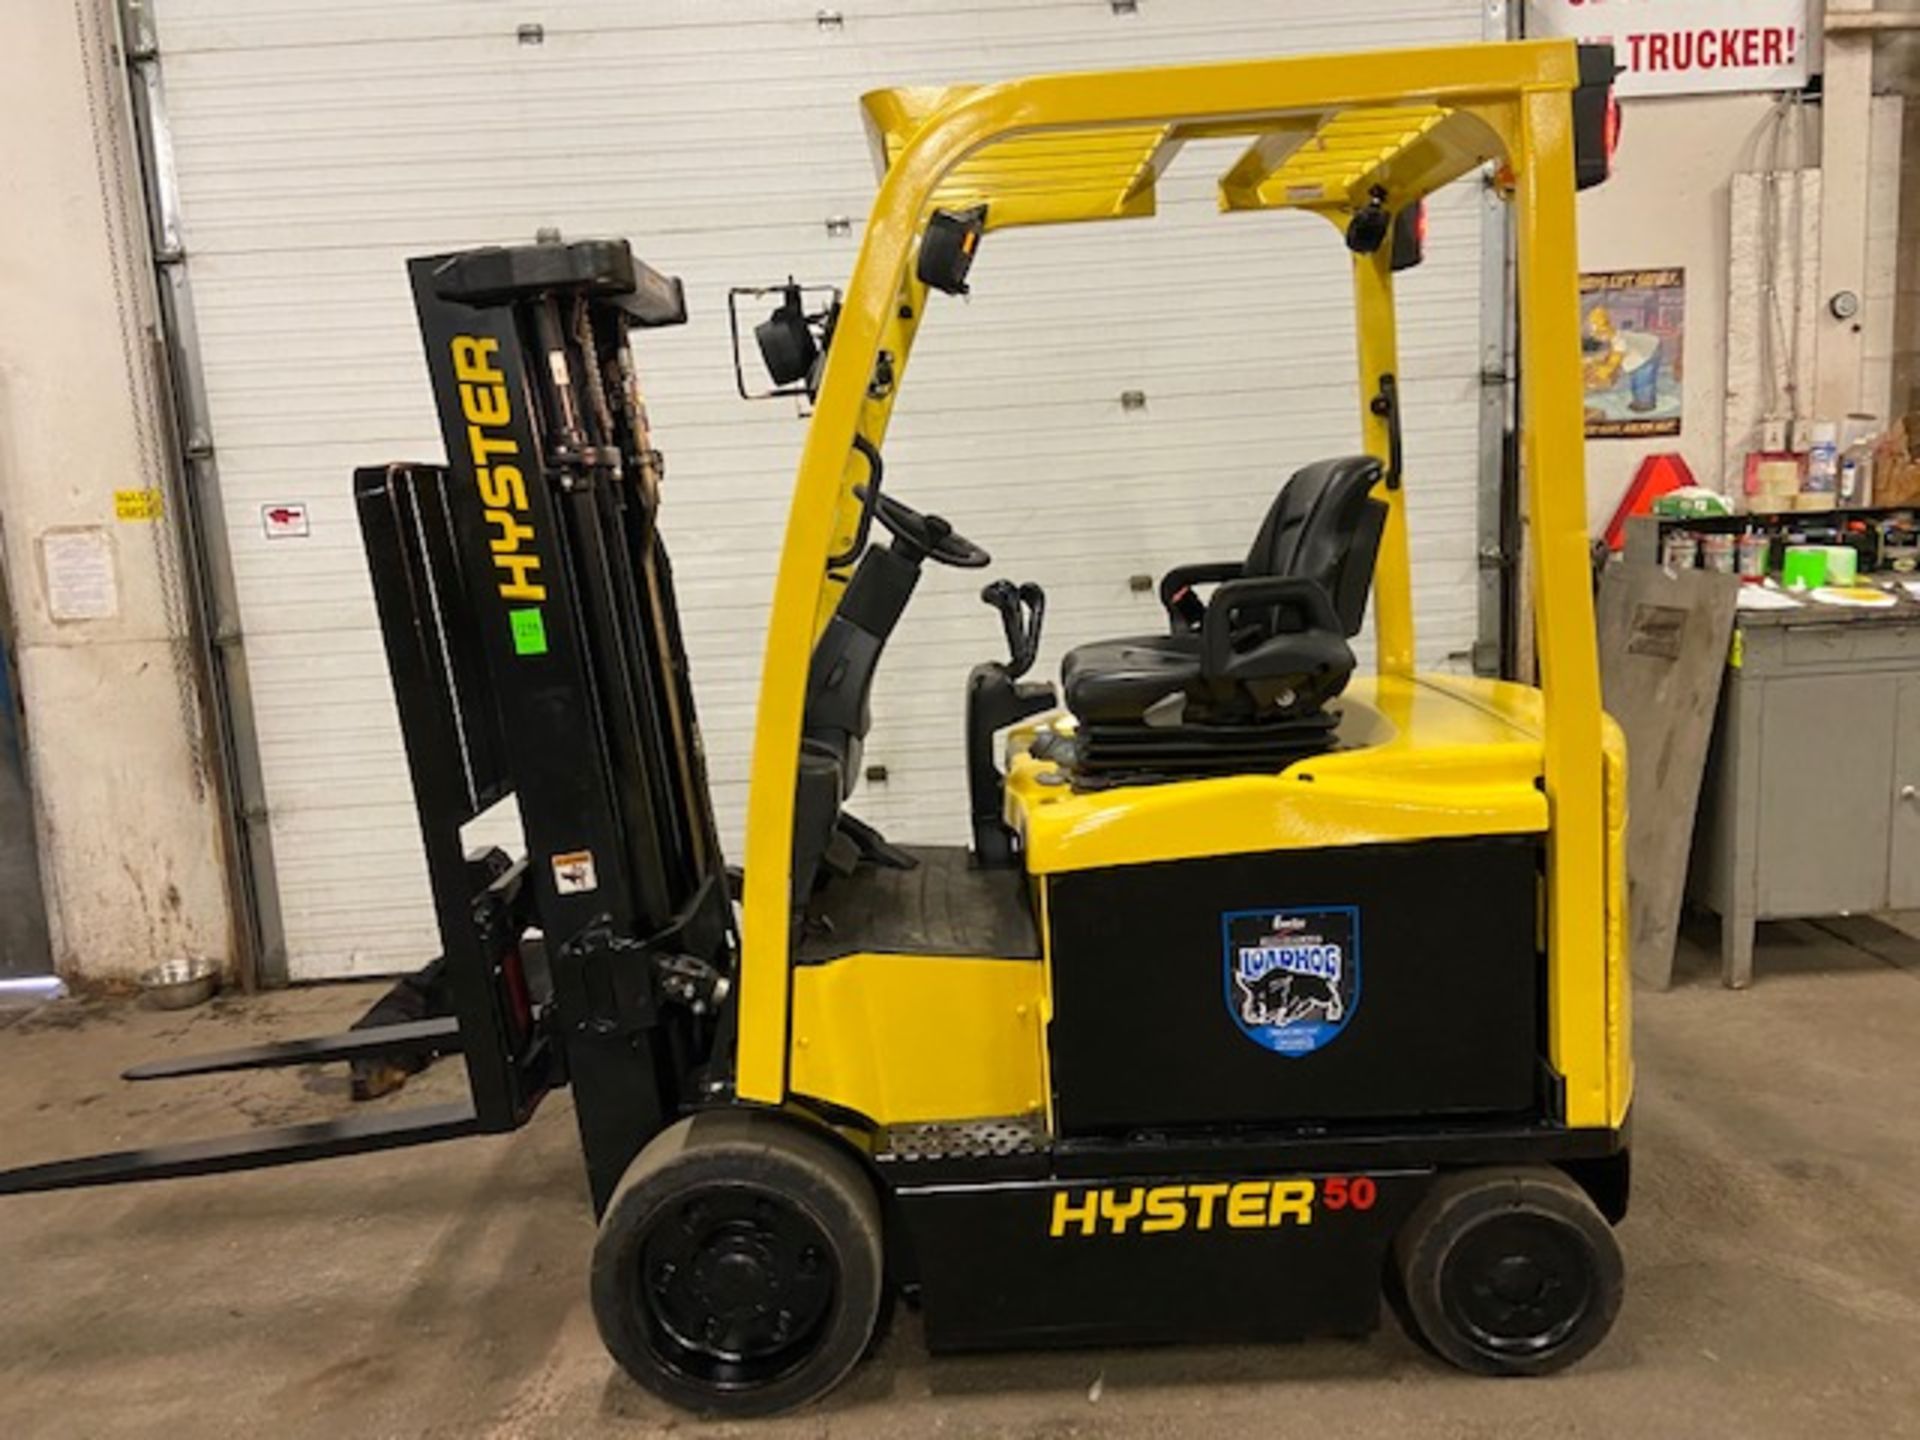 FREE CUSTOMS - 2012 Hyster 5000lbs Capacity Forklift Electric with 3-STAGE MAST with sideshift and